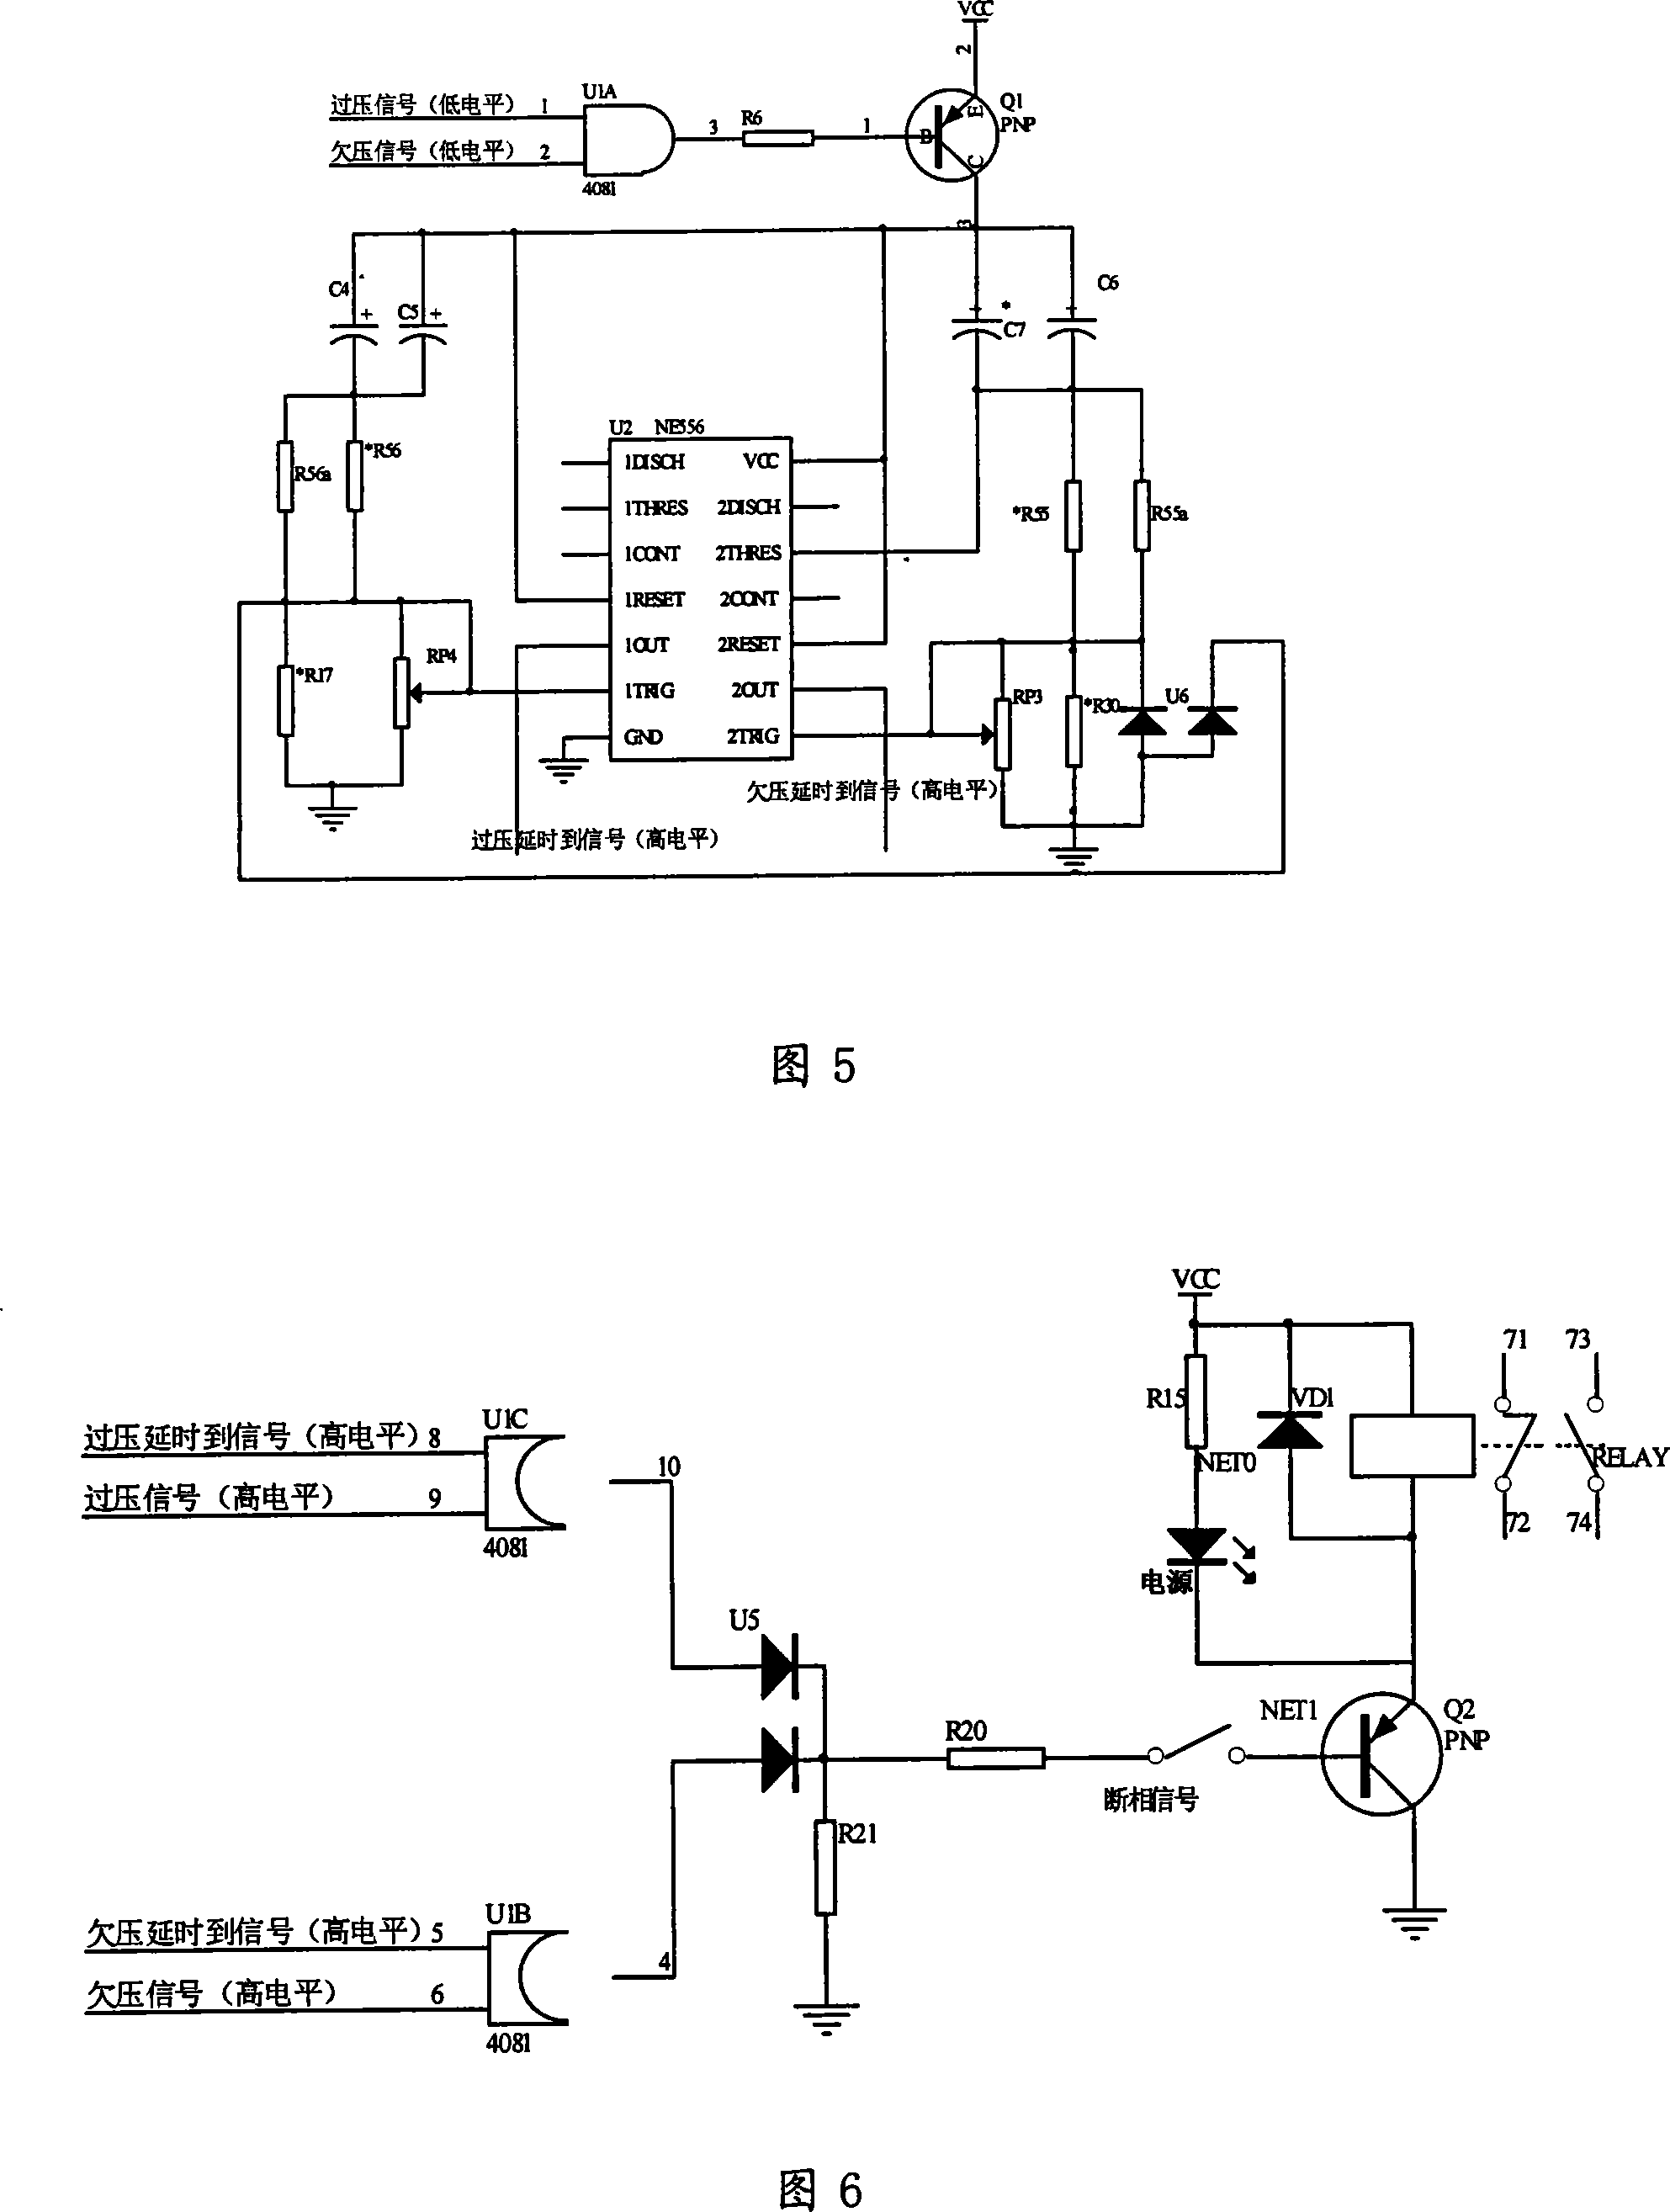 Control device of duplicate supply attent-unattent switch